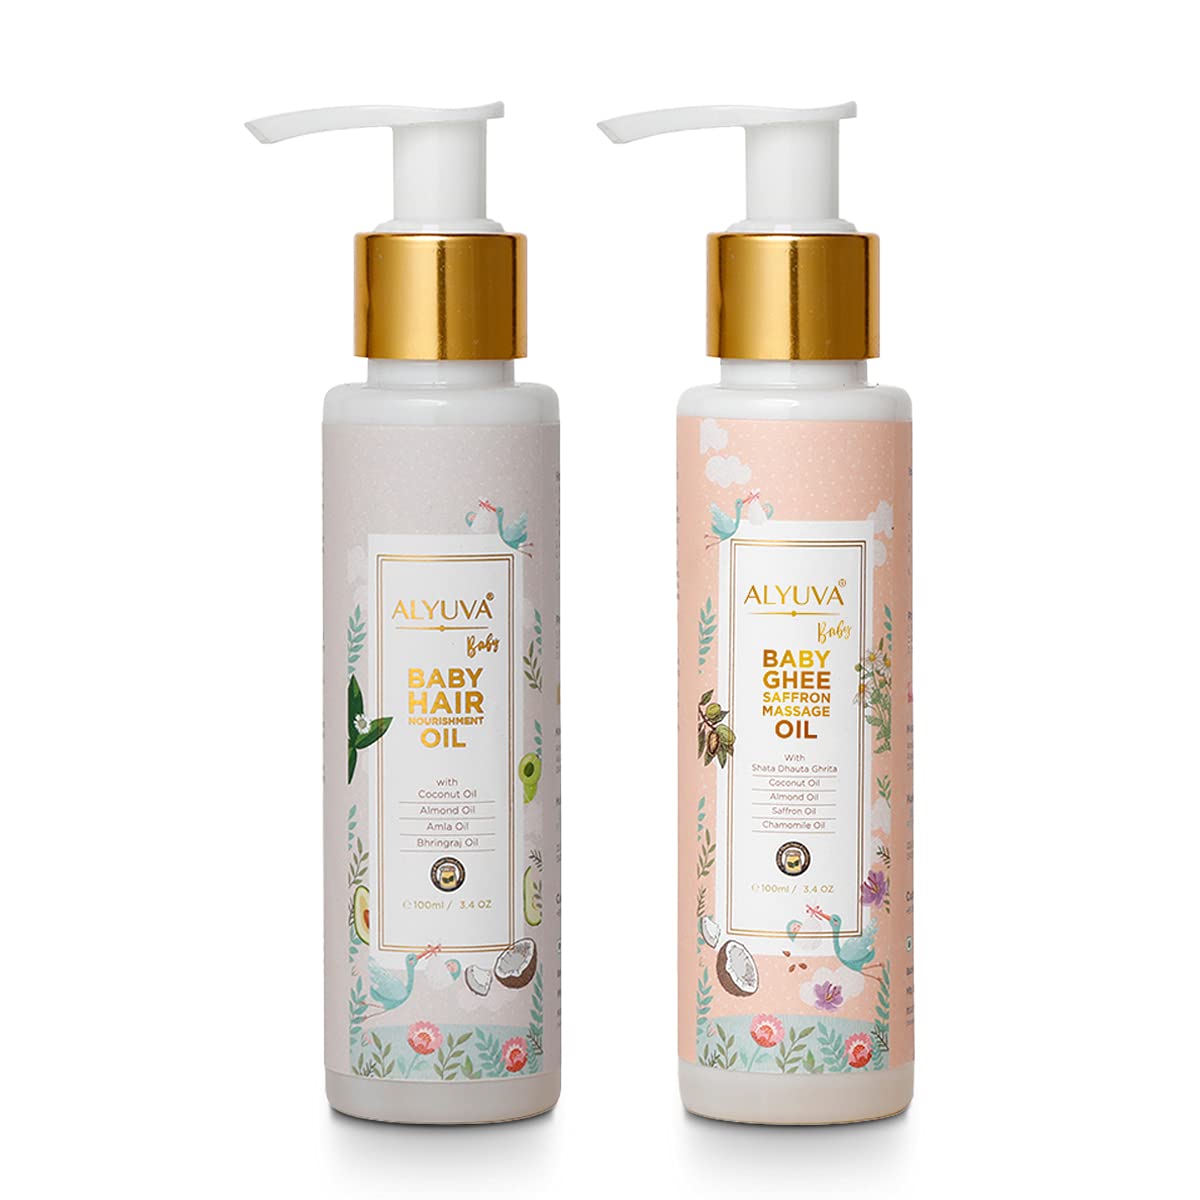 Alyuva baby care products 